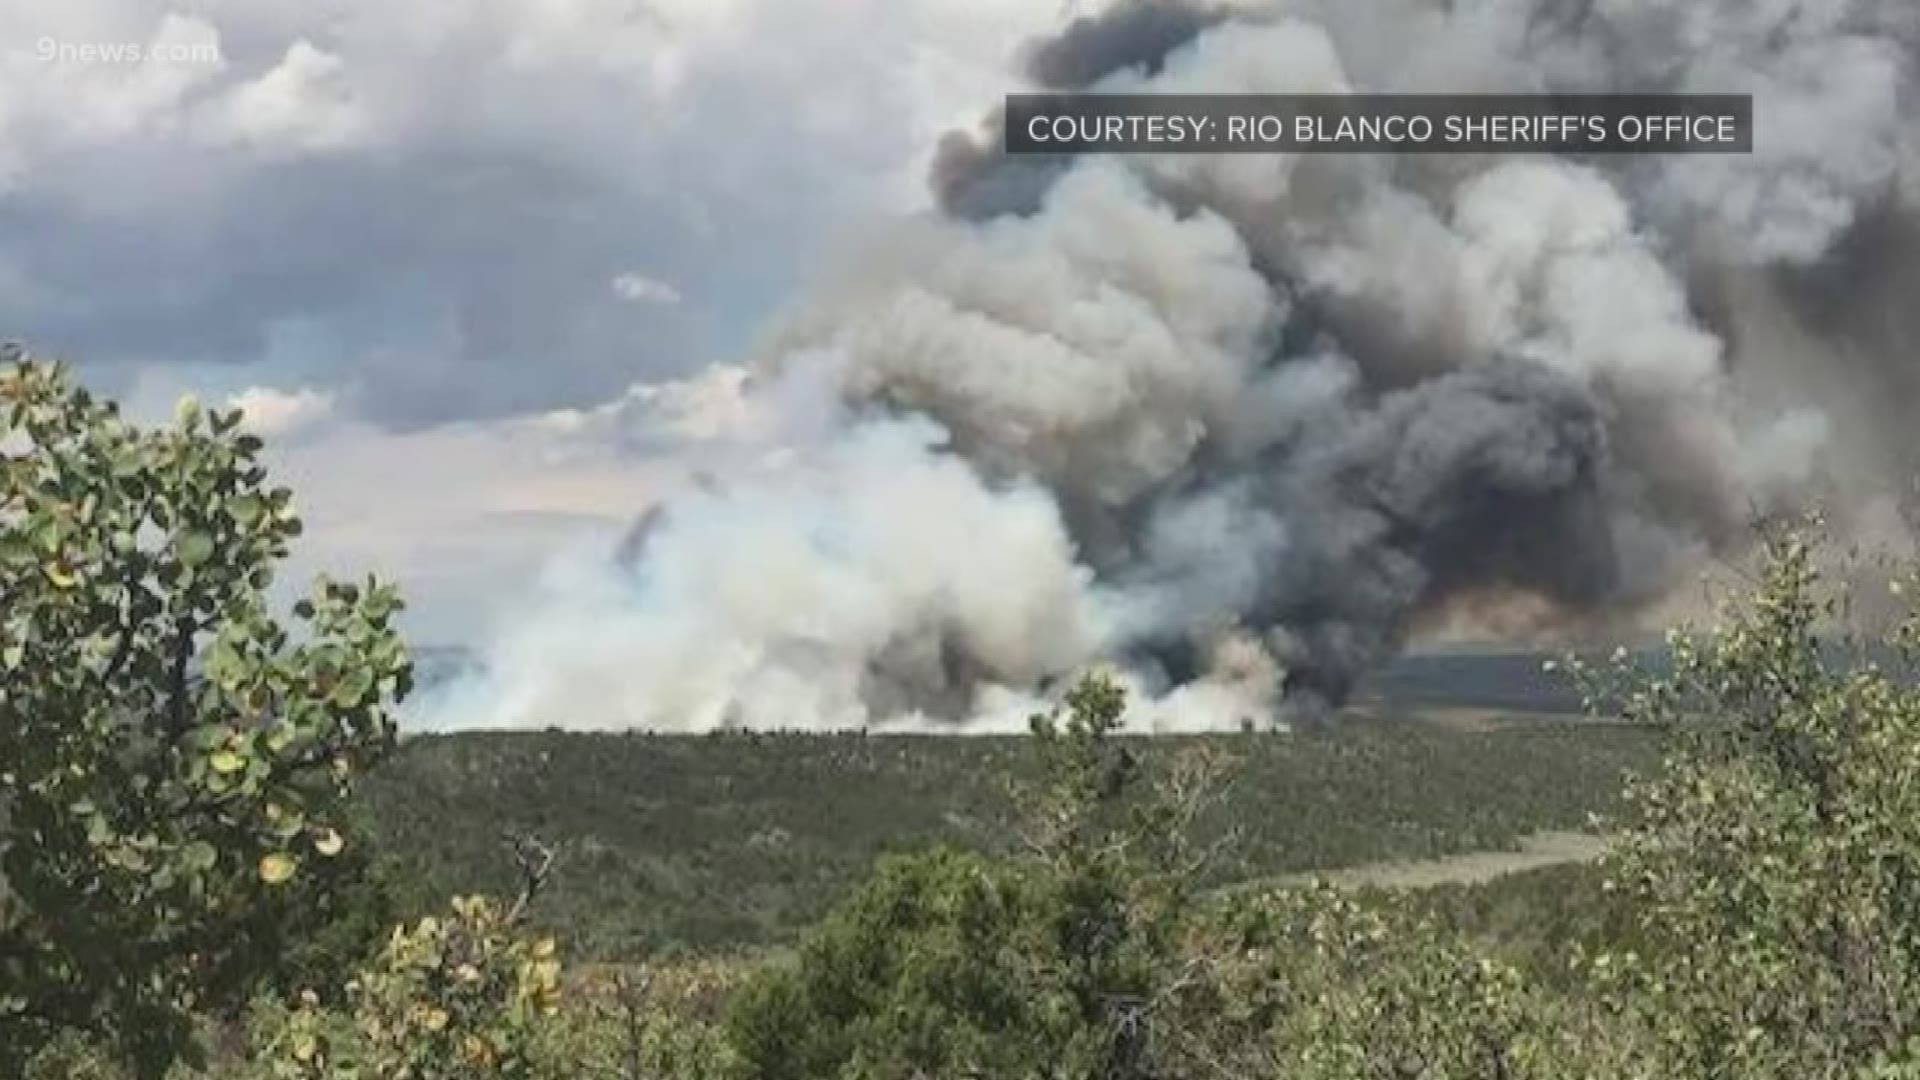 Firefighters are battling a 1,000-acre fire burning about 26 miles southwest of Meeker in Rio Blanco County.